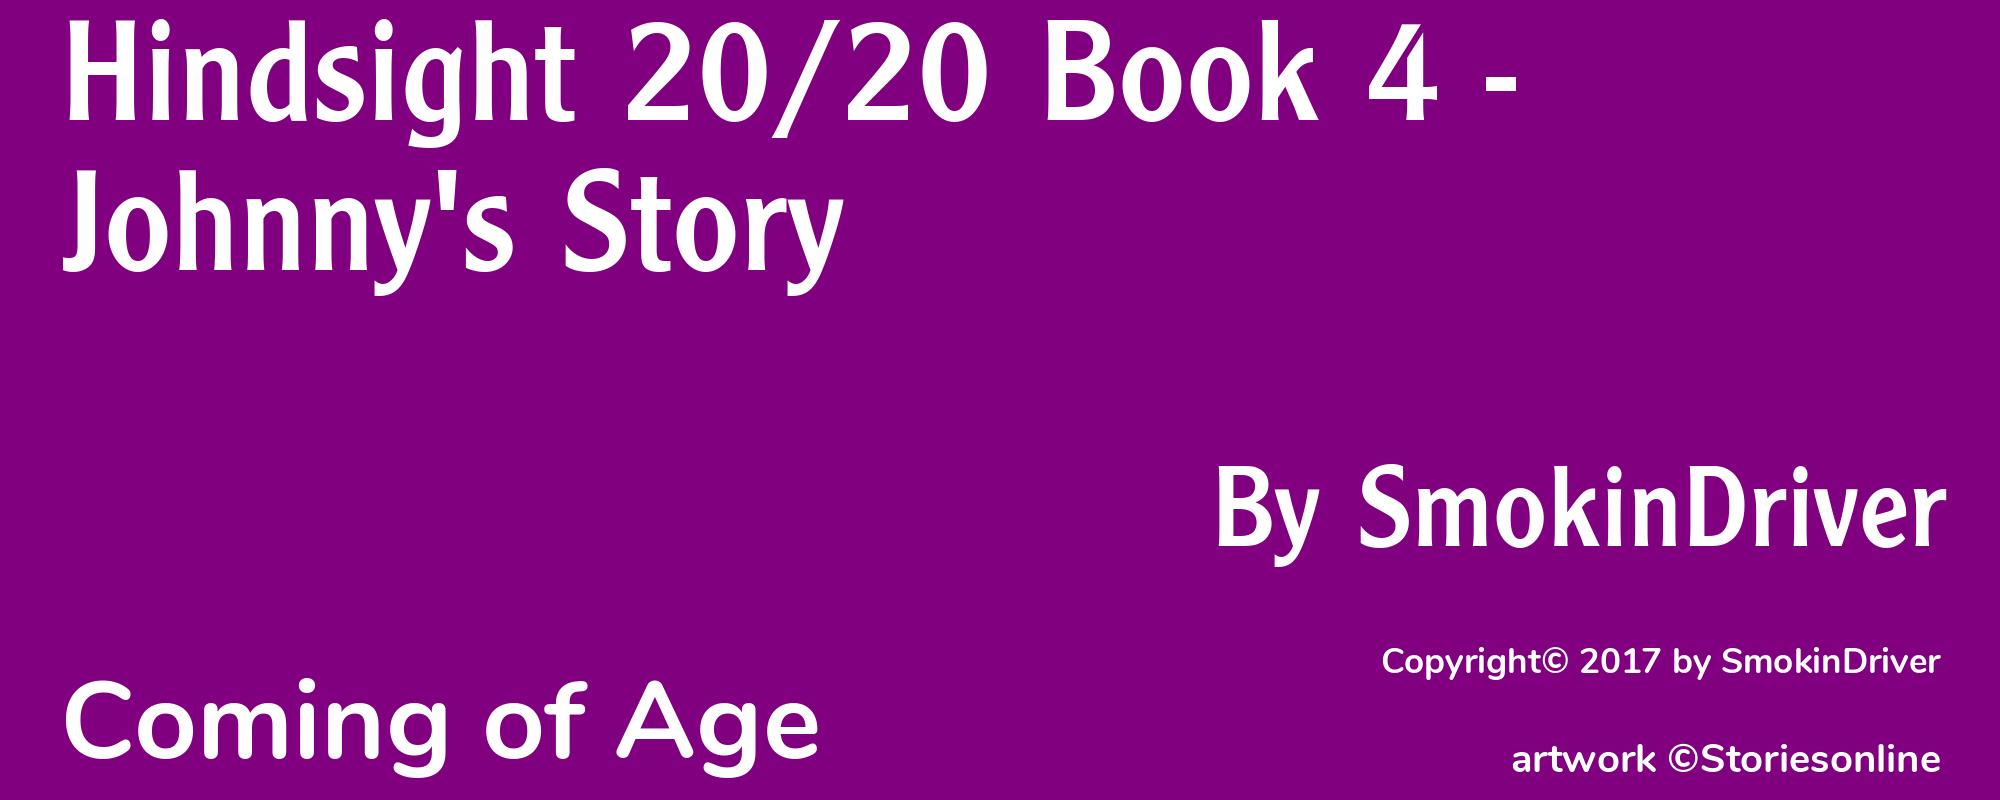 Hindsight 20/20 Book 4 - Johnny's Story - Cover